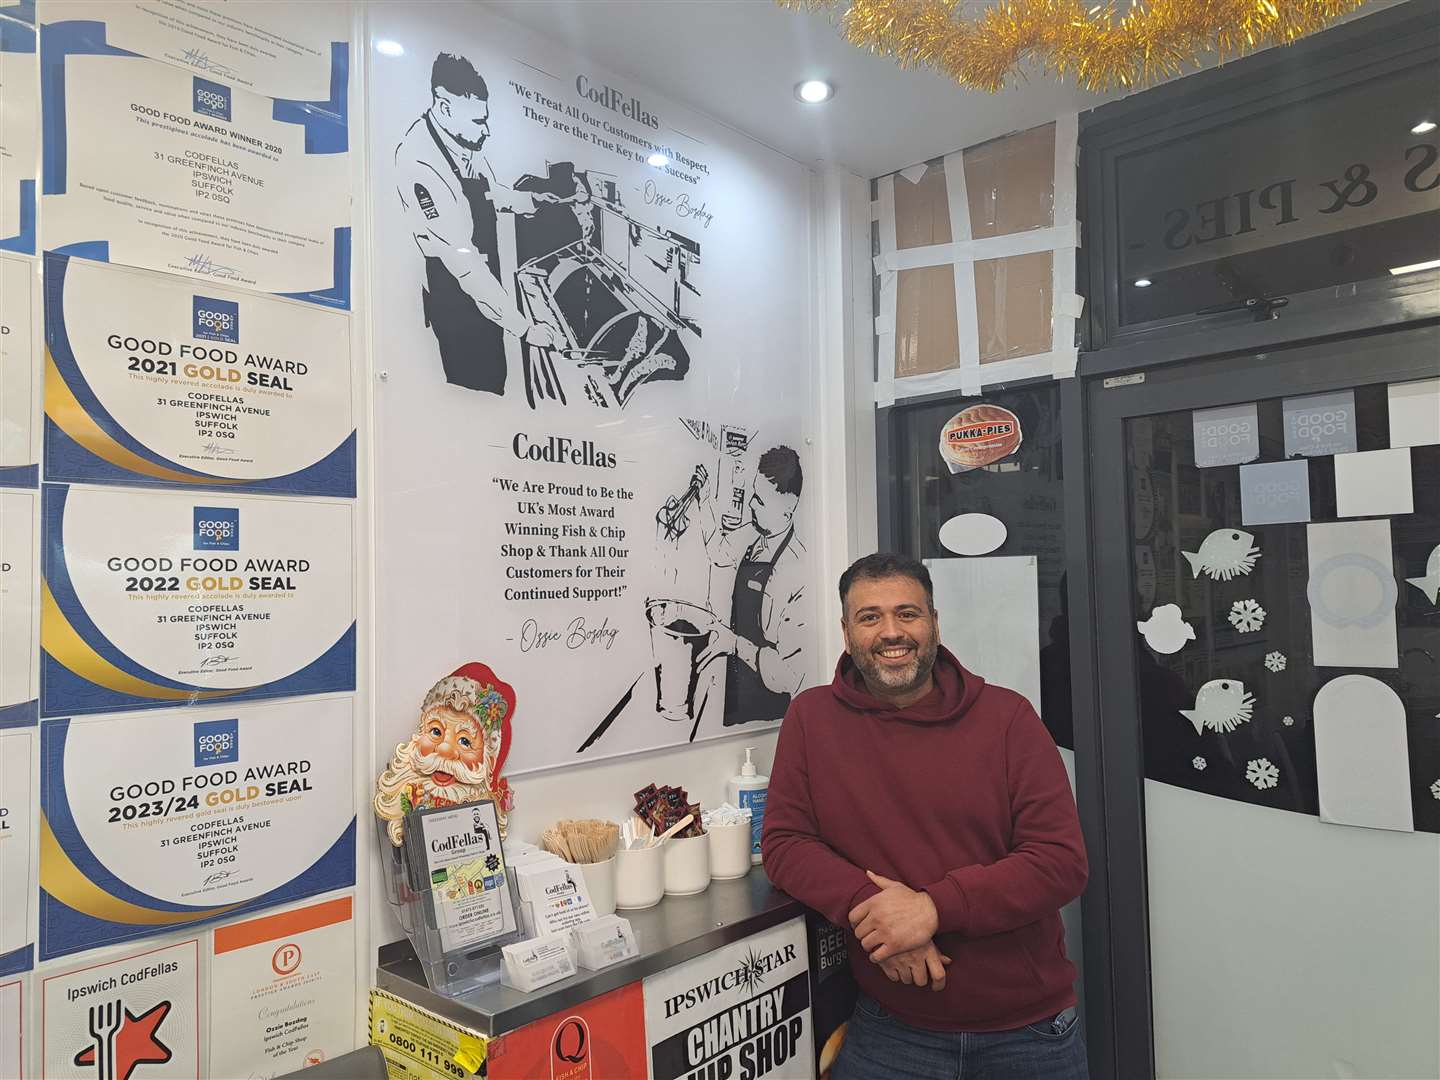 Ozzie's determination has seen his chippy win numerous awards, and claims it is the UK's most award-winning fish and chip shop. Picture: Ash Jones